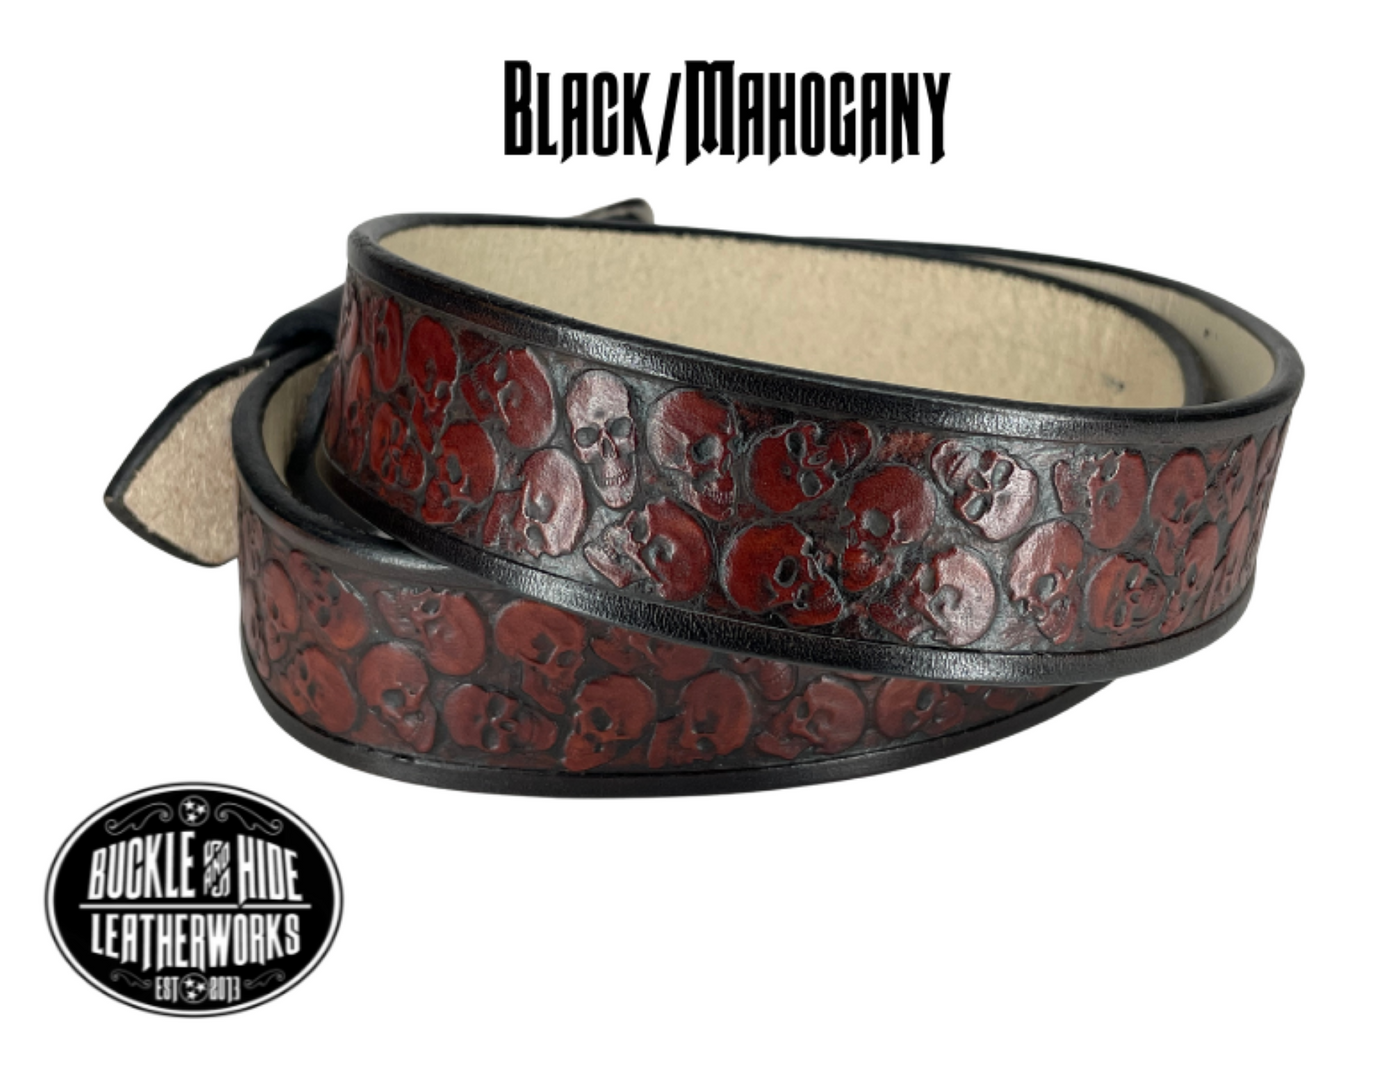 "The Forsaken" is a handmade real leather belt made from a single strip of cowhide shoulder leather that is 8-10 oz. or approx. 1/8" thick. It has hand burnished (smoothed) edges and the Serpent pattern embossed on the surface. The antique nickel plated solid brass buckle is snapped in place with heavy snaps.  This belt is made just outside Nashville in Smyrna, TN. Belt width is 1 1/2", back view of color option black/mahogany